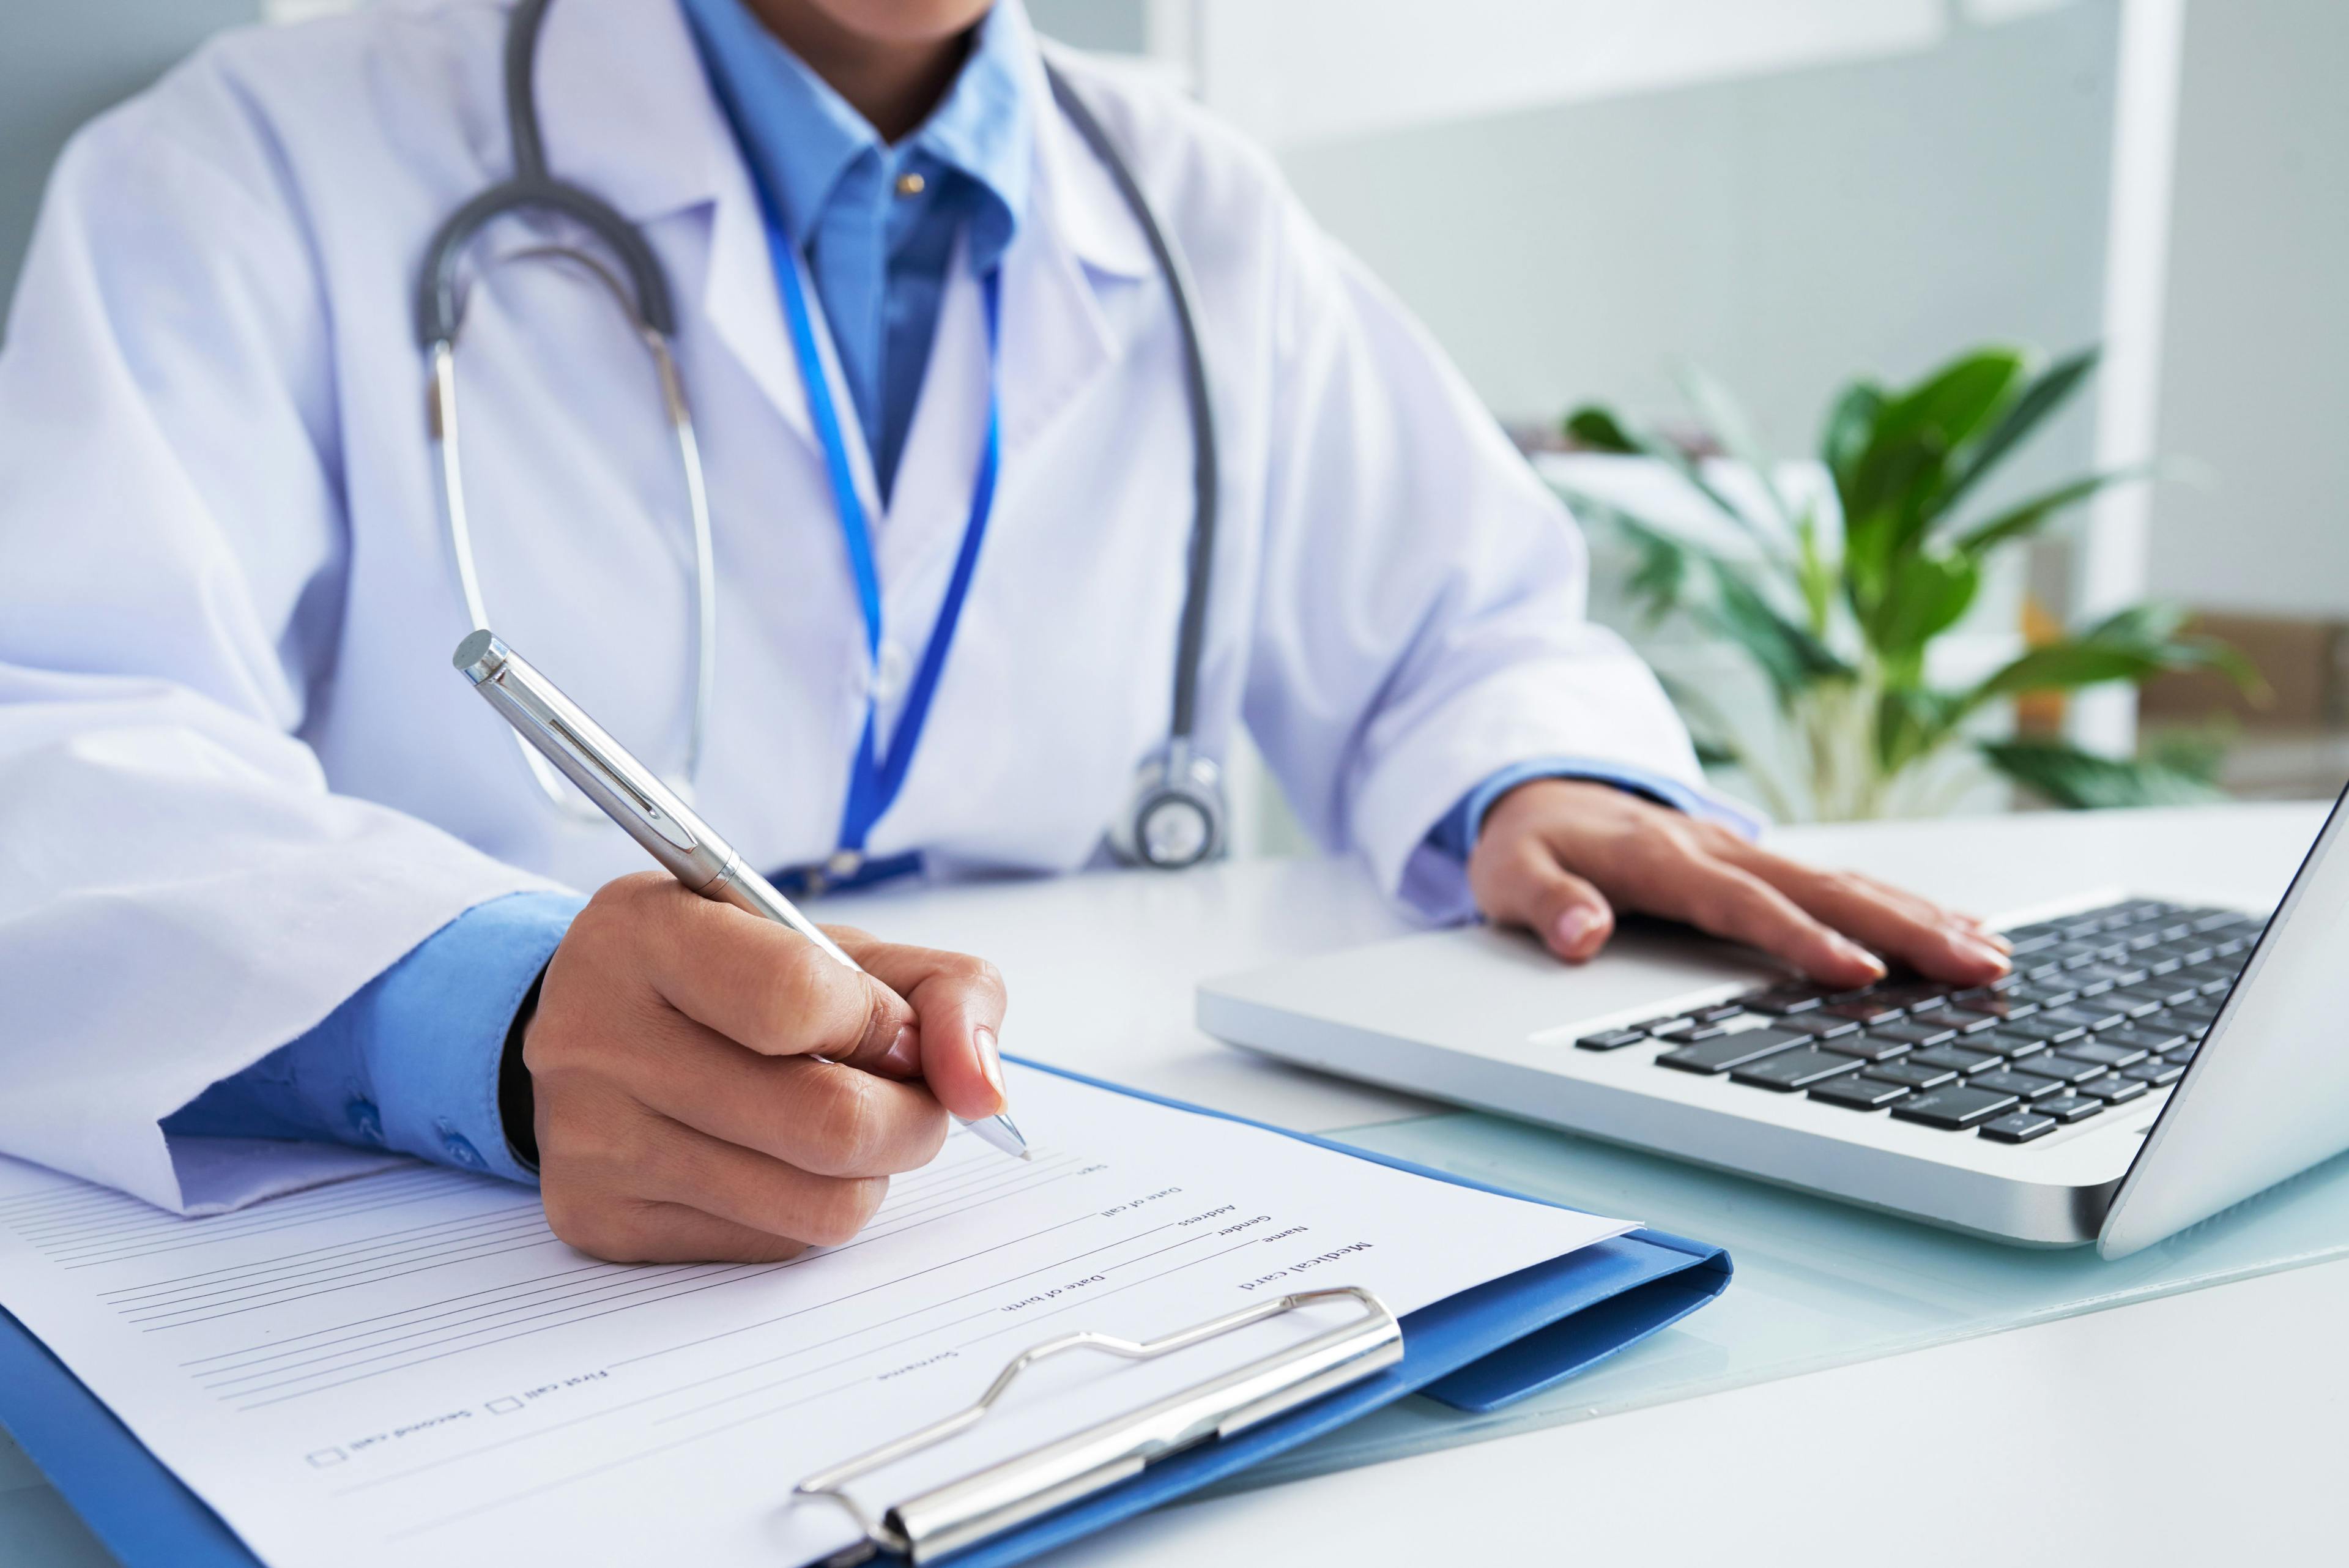 How to choose medical software for your practice